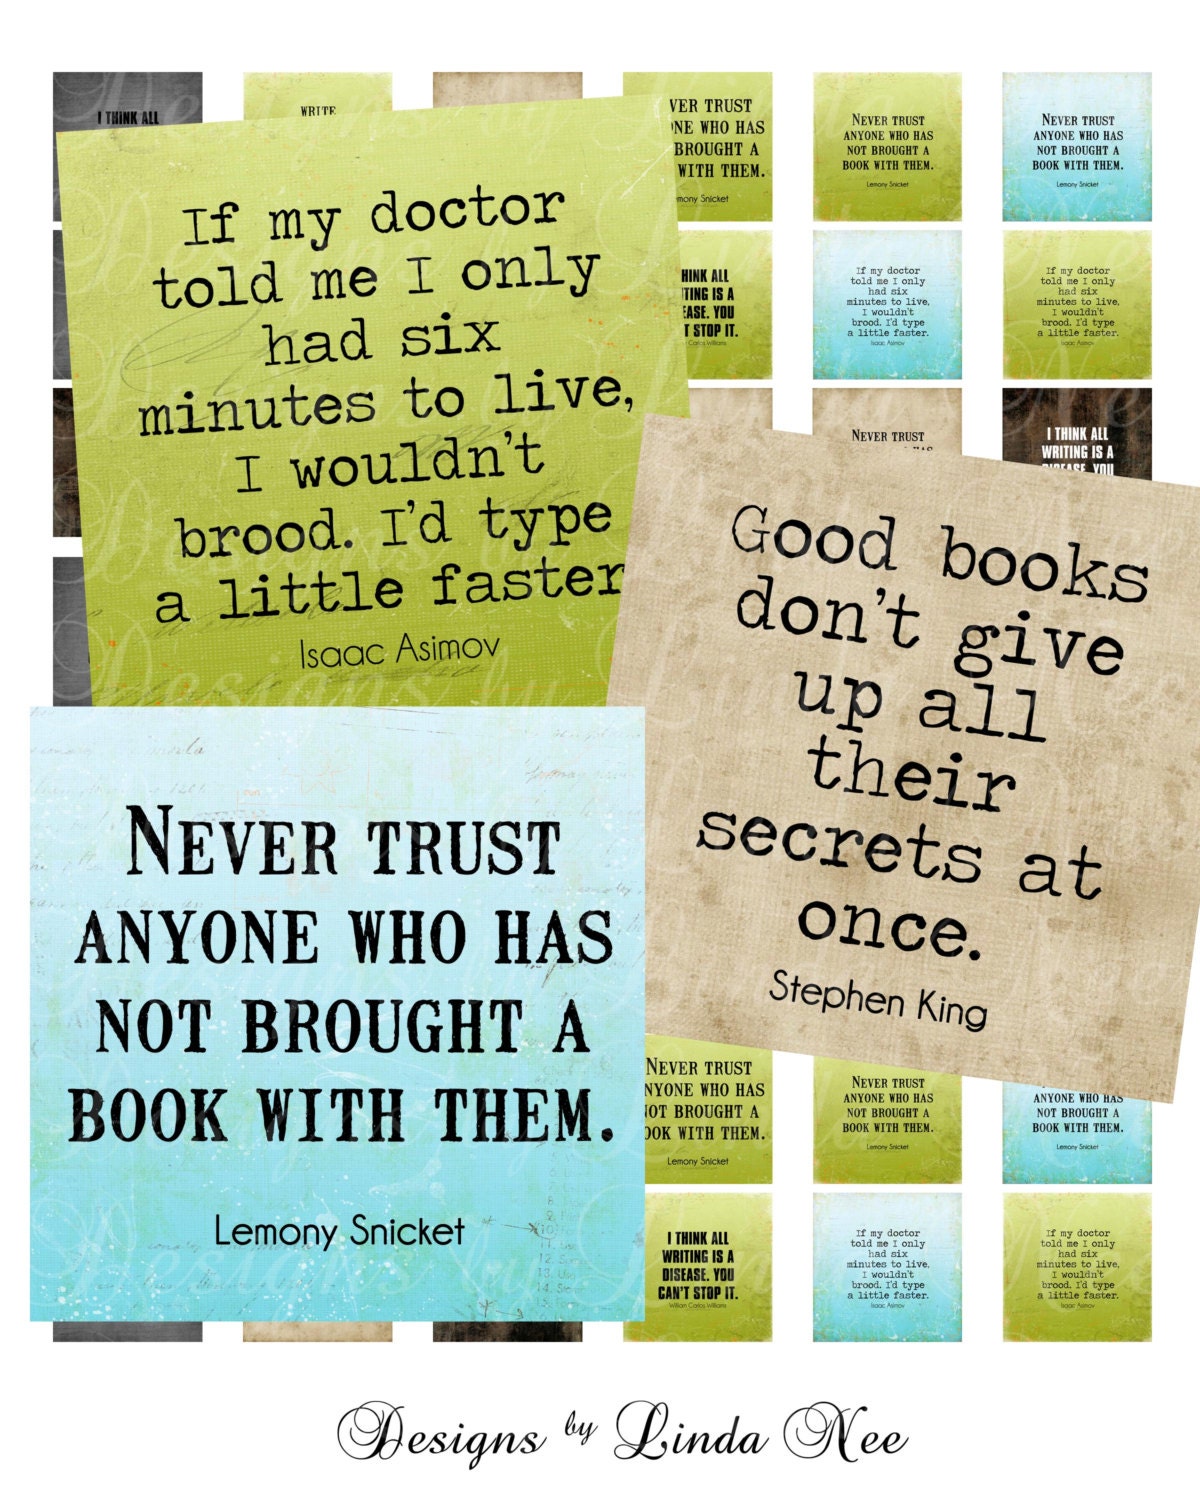 Quotes By Famous Authors Writing. QuotesGram